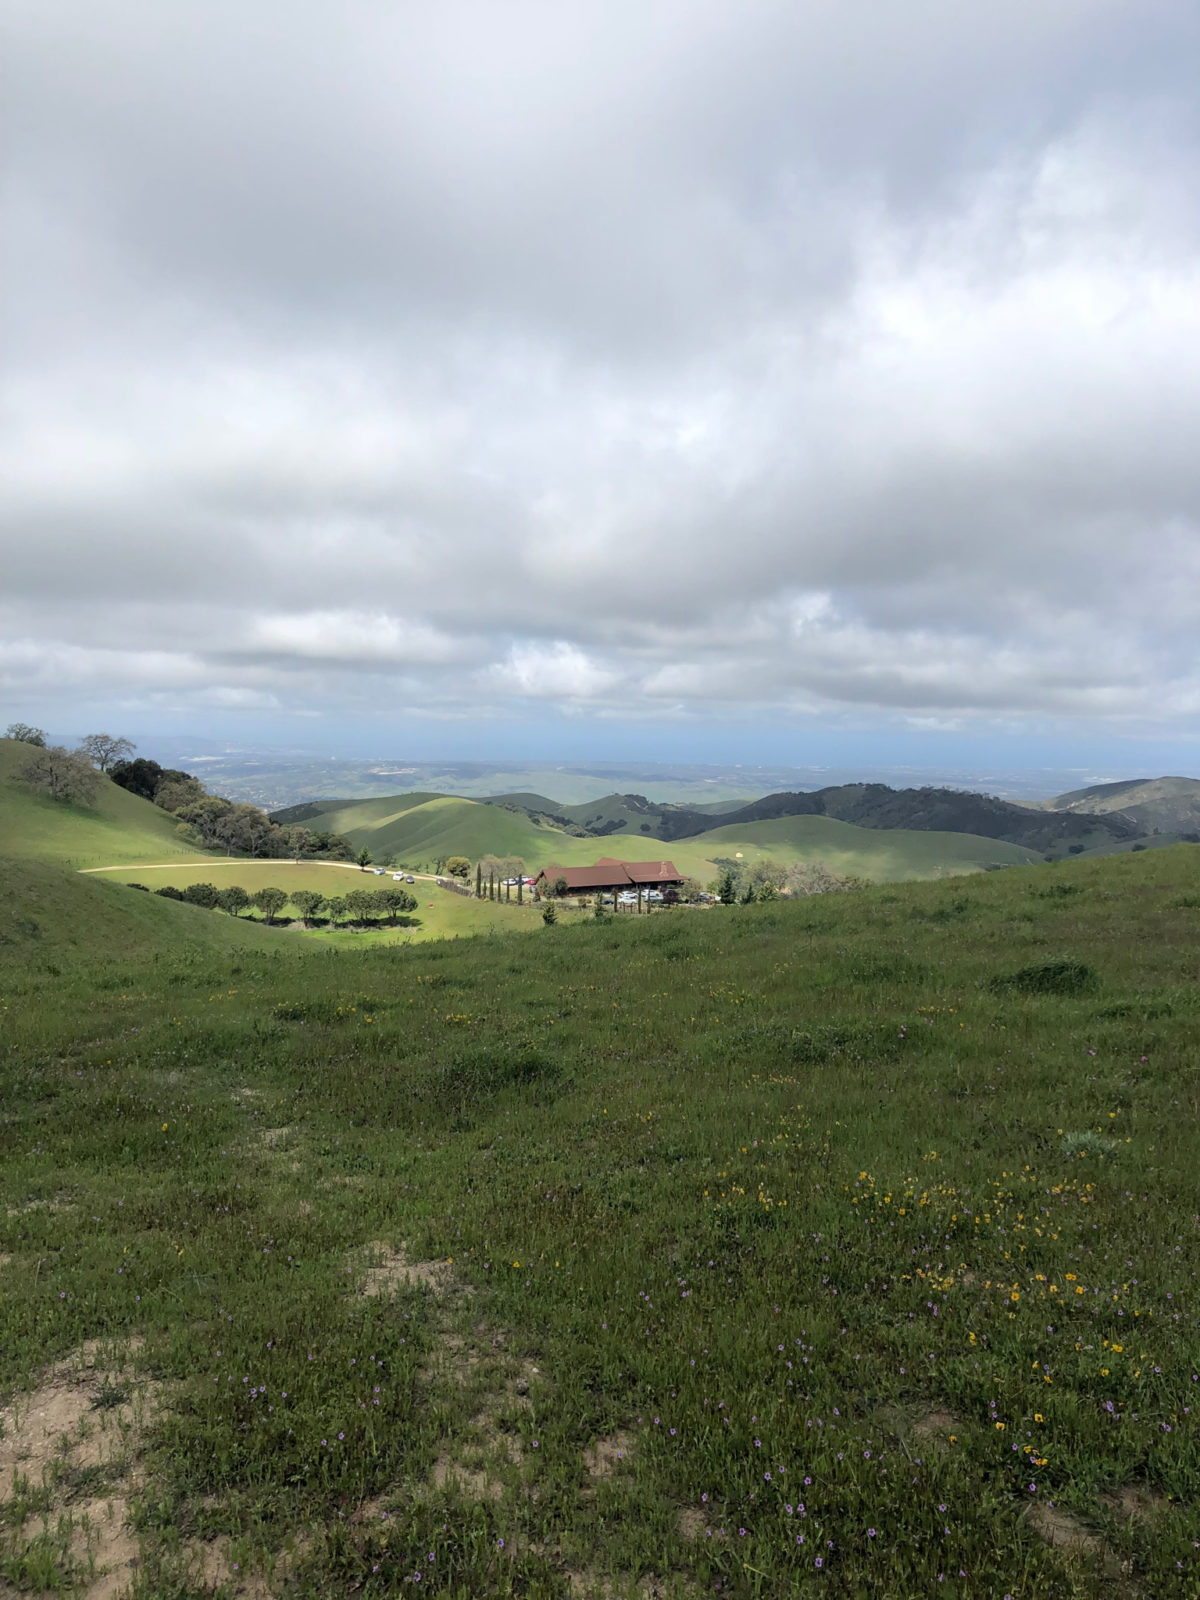 A Quick Jaunt to Monterey and Tour of the Dorrance Ranch